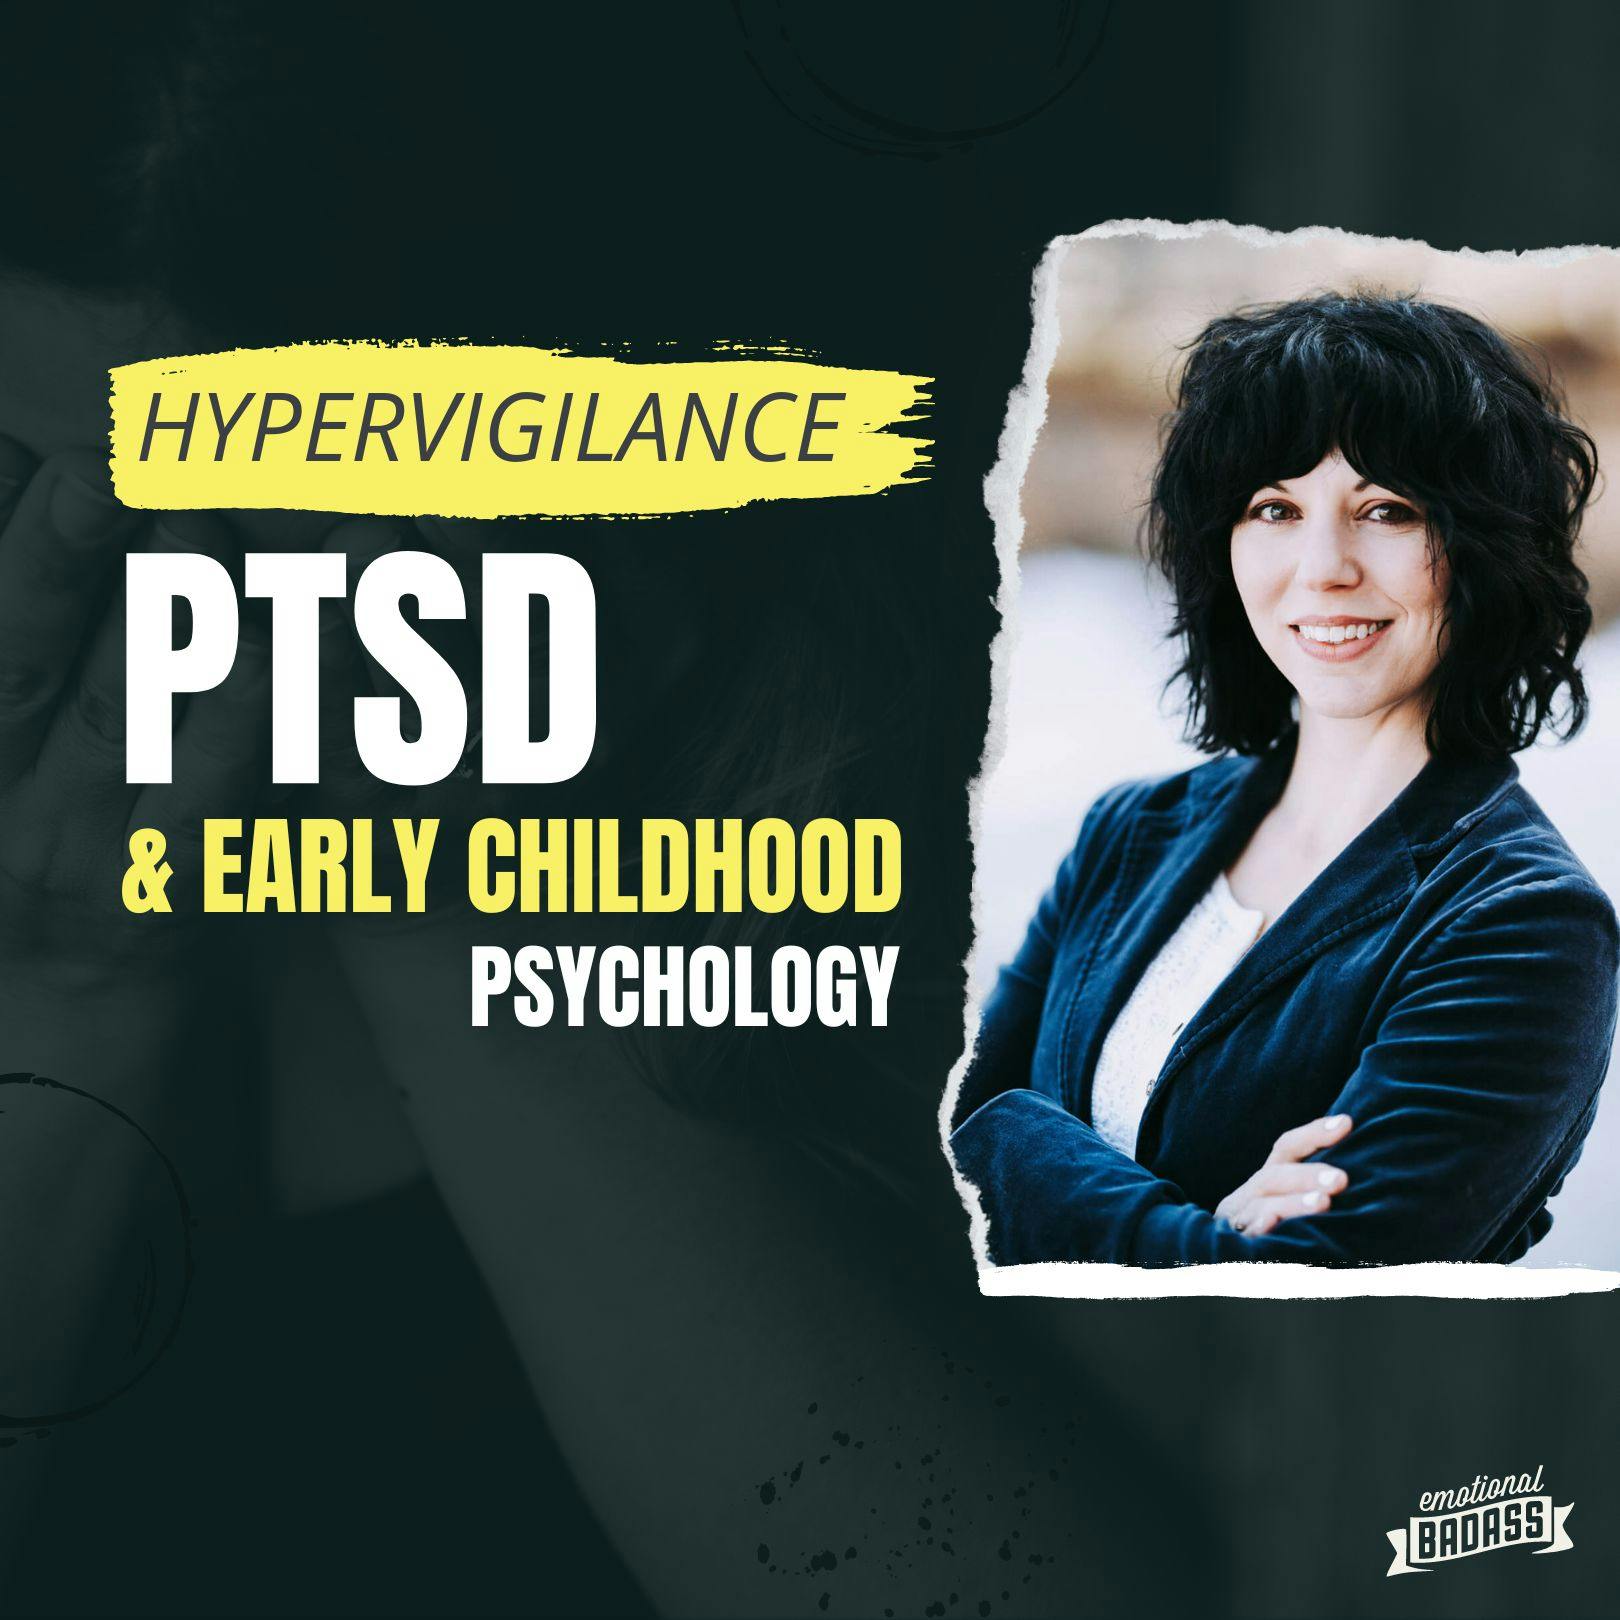 How Hypervigilance & PTSD Relate to Early Childhood Psychology & Mental Health